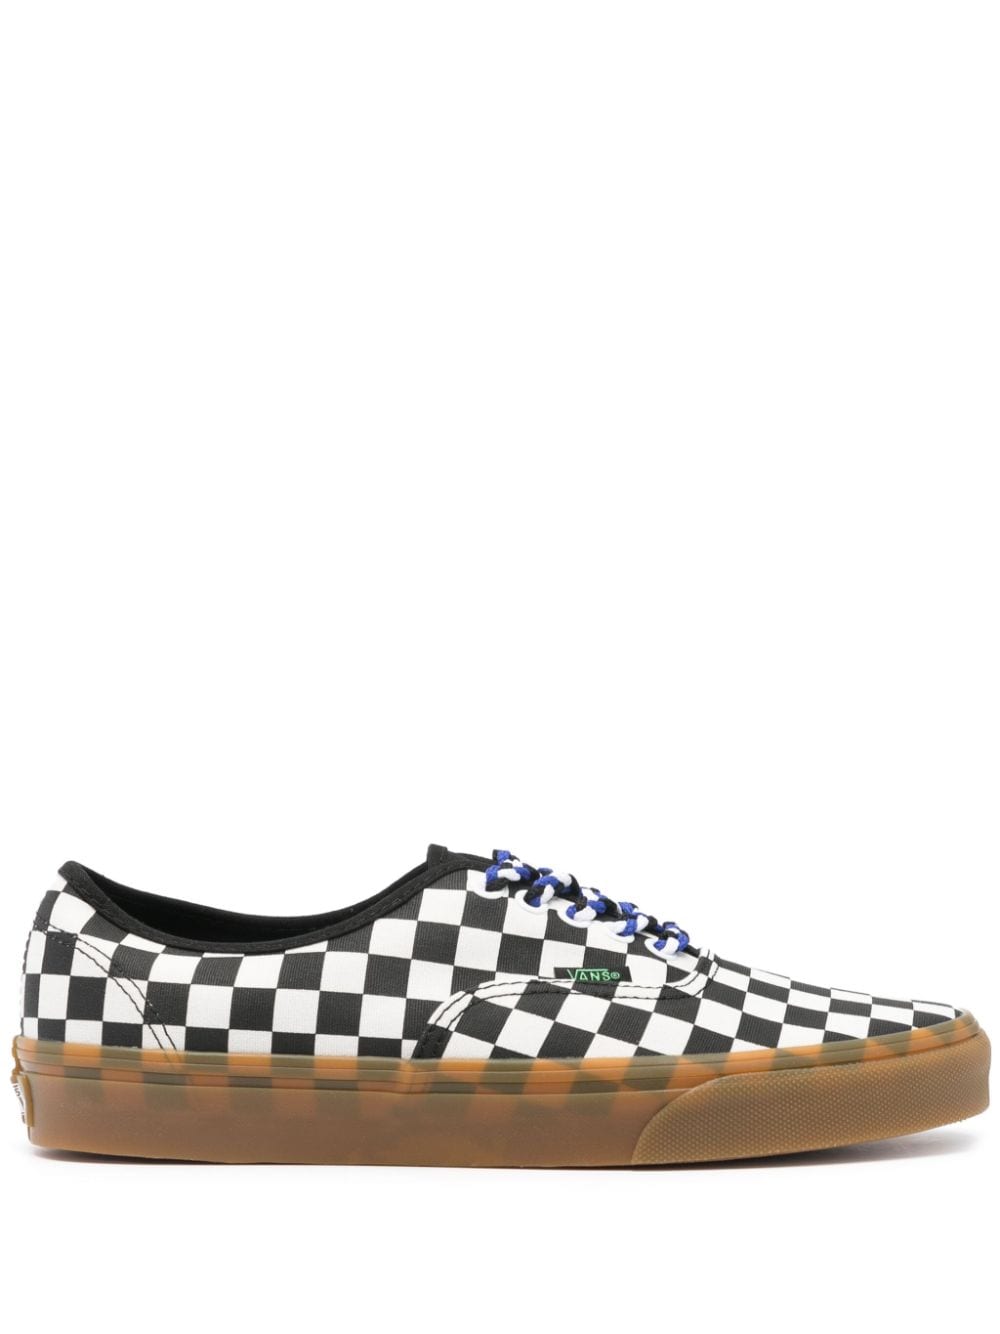 Authentic checkerboard sneakers